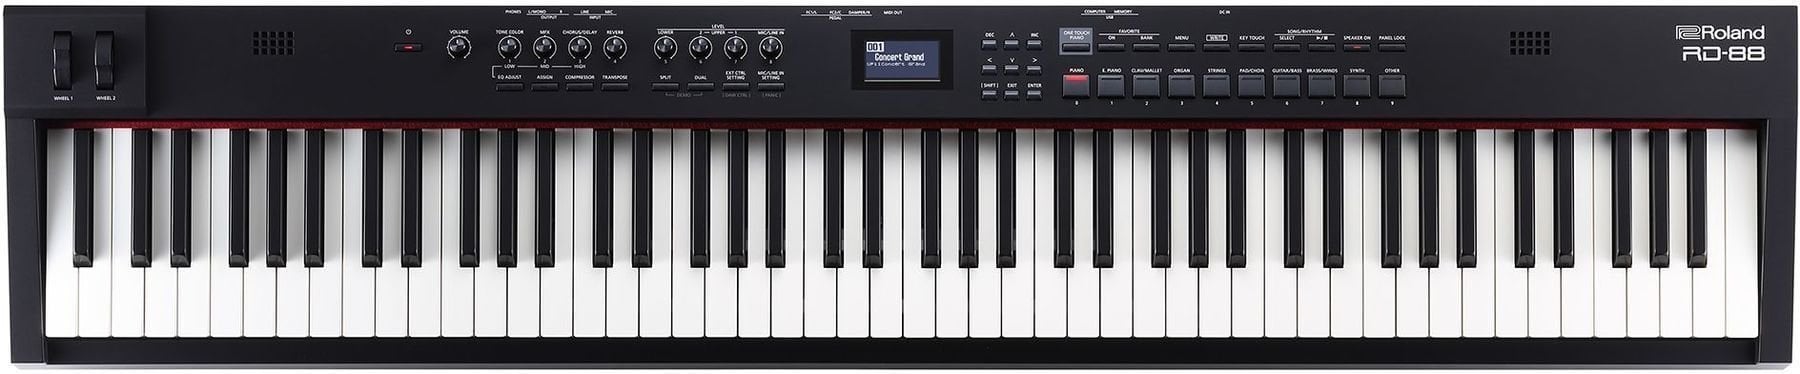 Digital Stage Piano Roland RD-88 Digital Stage Piano